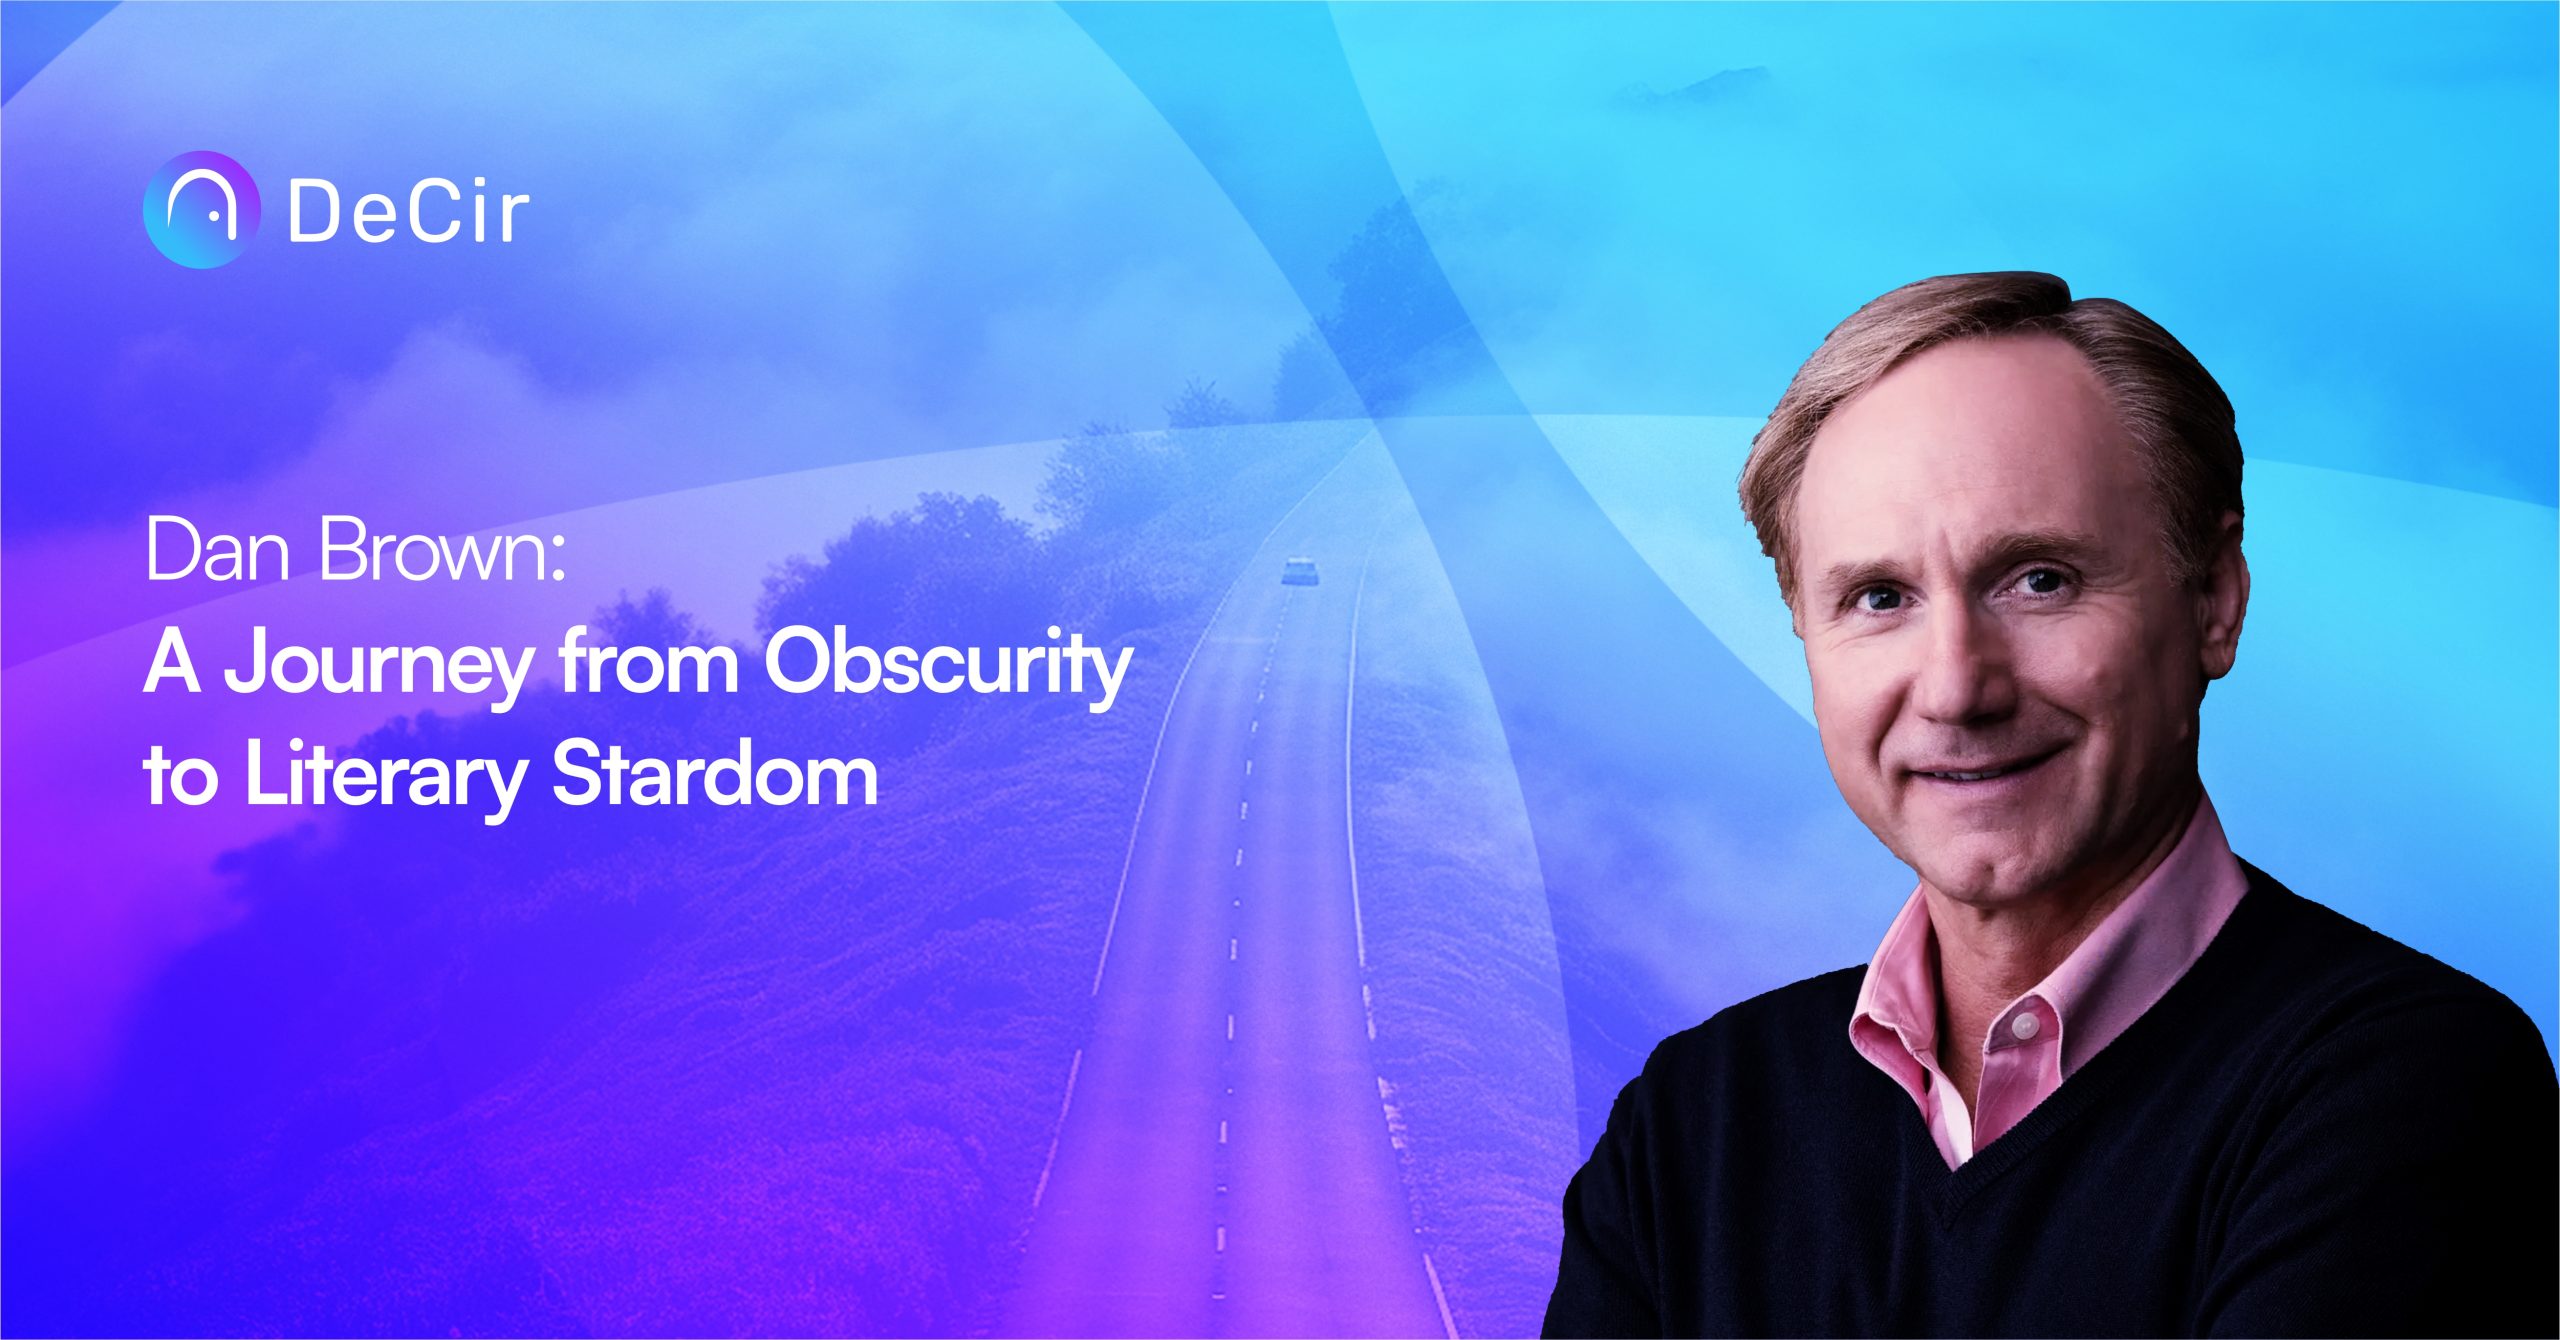 Dan Brown: A Journey from Obscurity to Literary Stardom